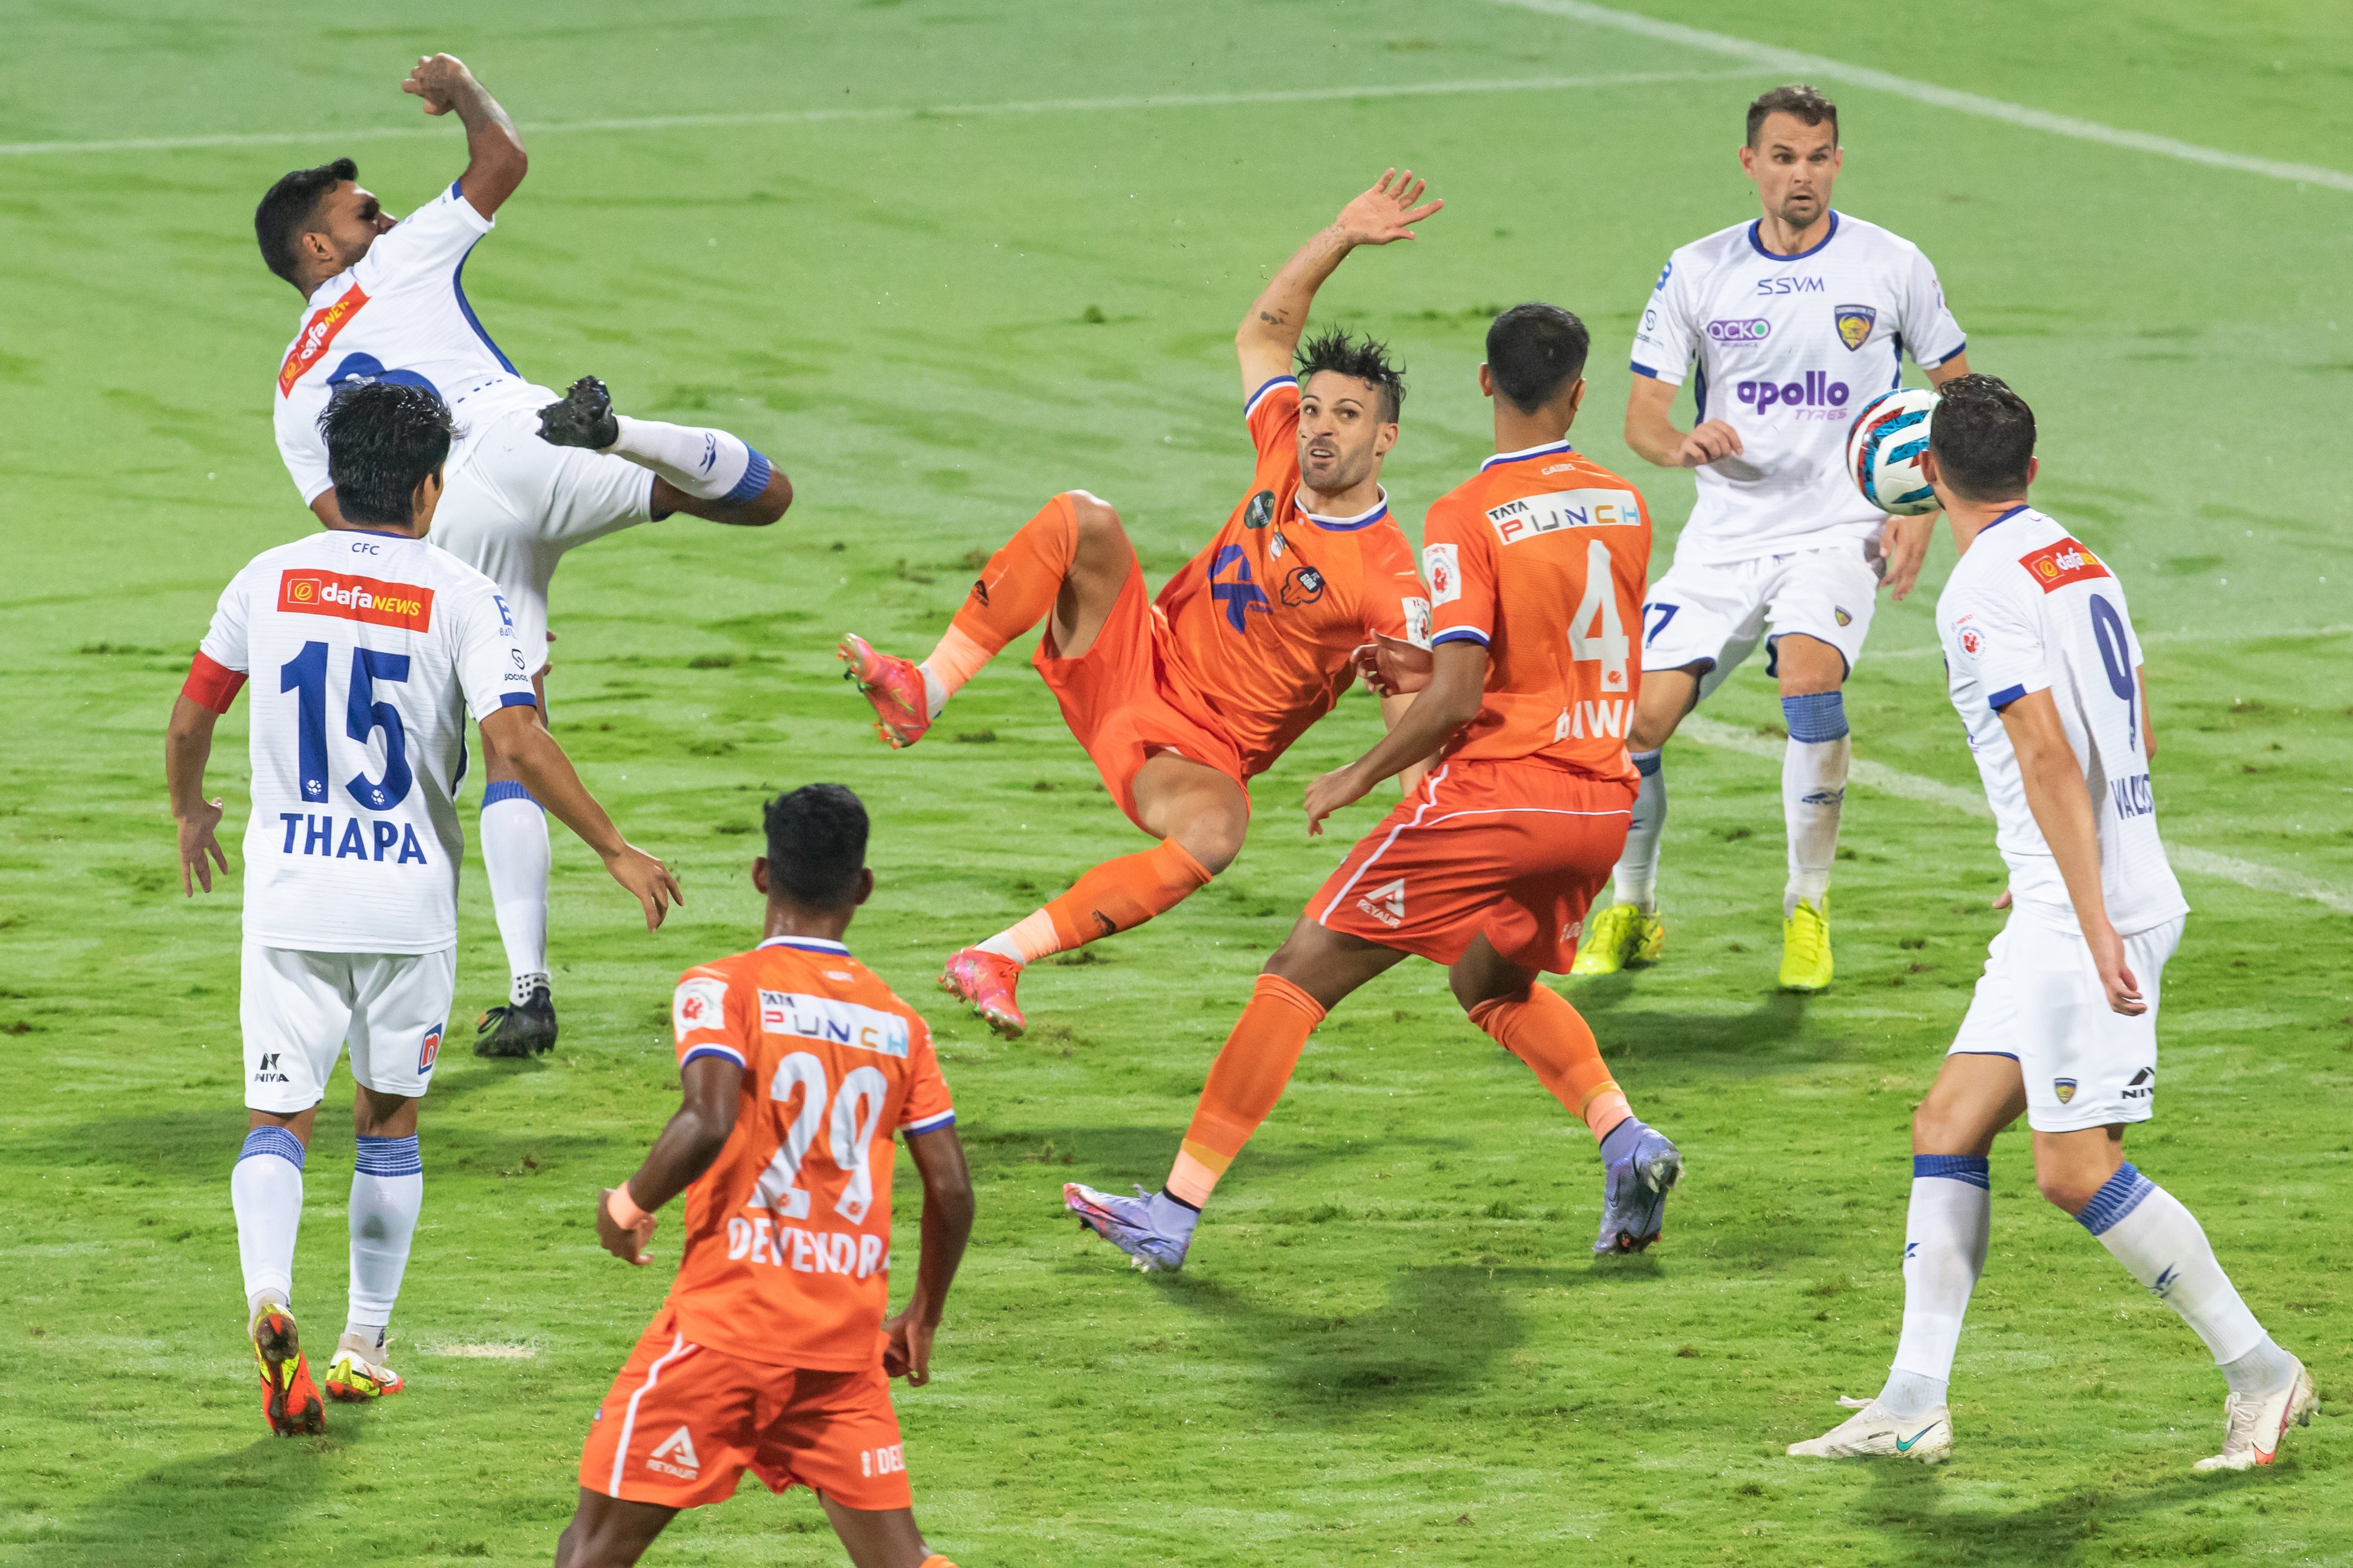 ISL 2021-22: Chennaiyin FC head coach Bozidar Bandovic feels draw would have been more fair result after defeat against FC Goa